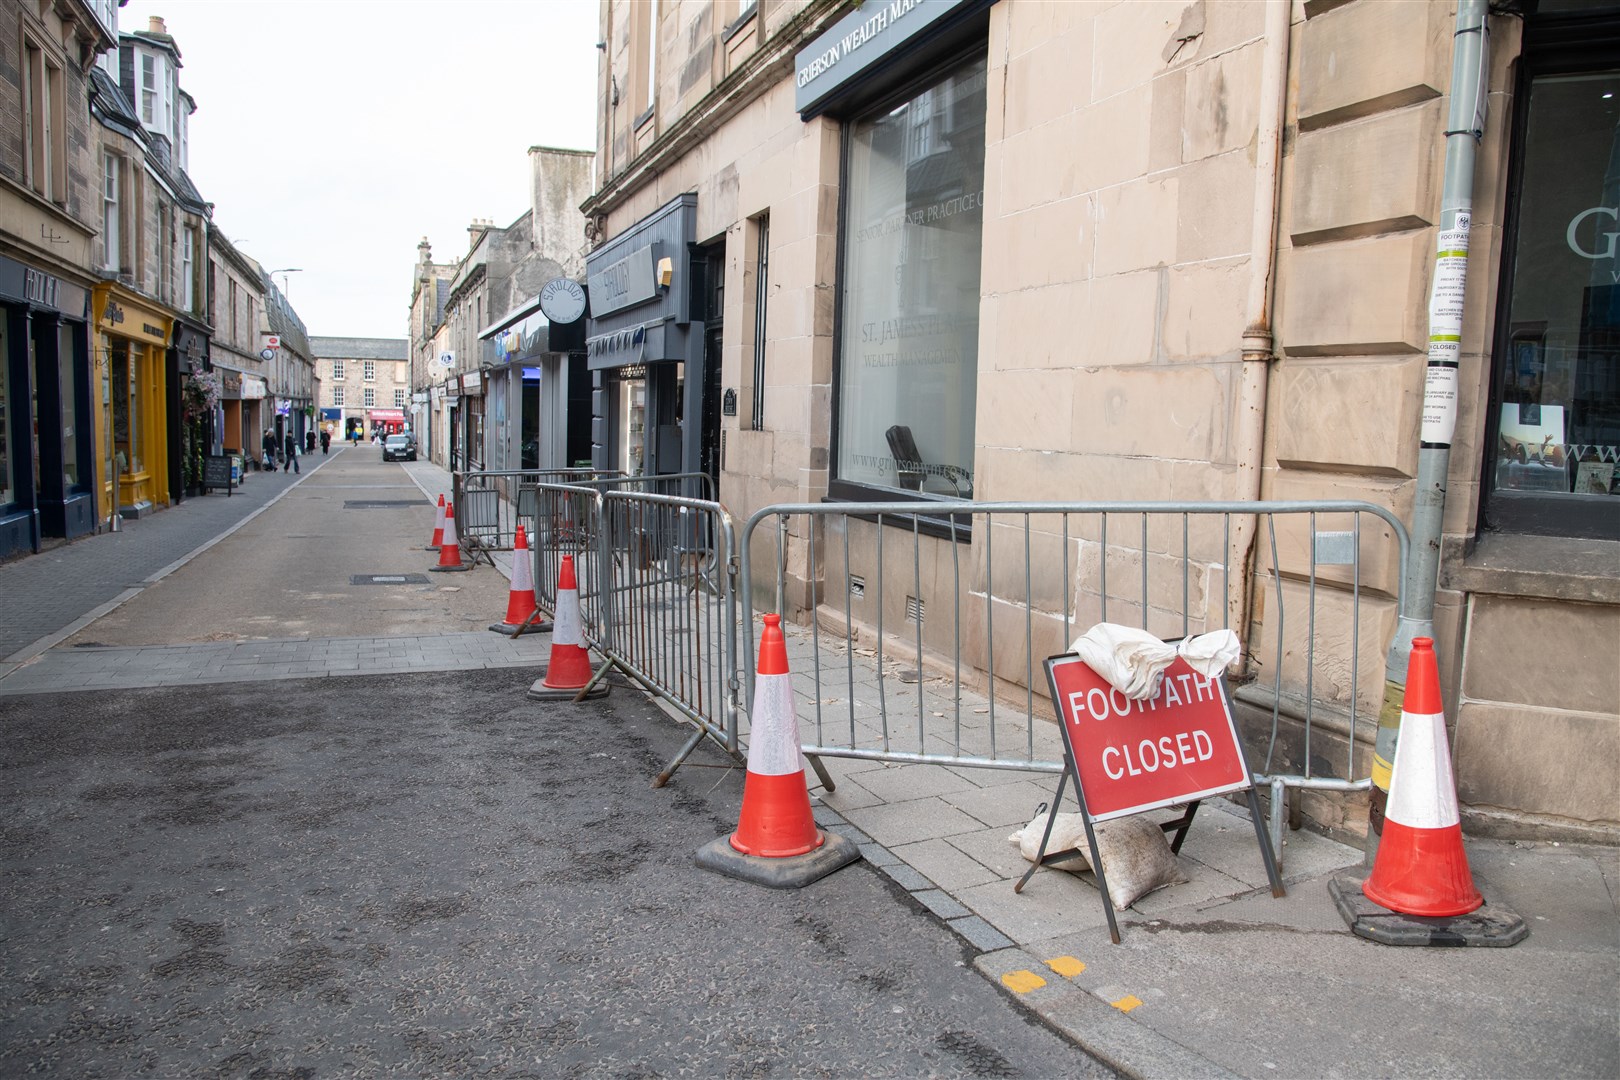 Sirology and Grierson Wealth Management remain open despite the fencing being in place. Picture: Daniel Forsyth